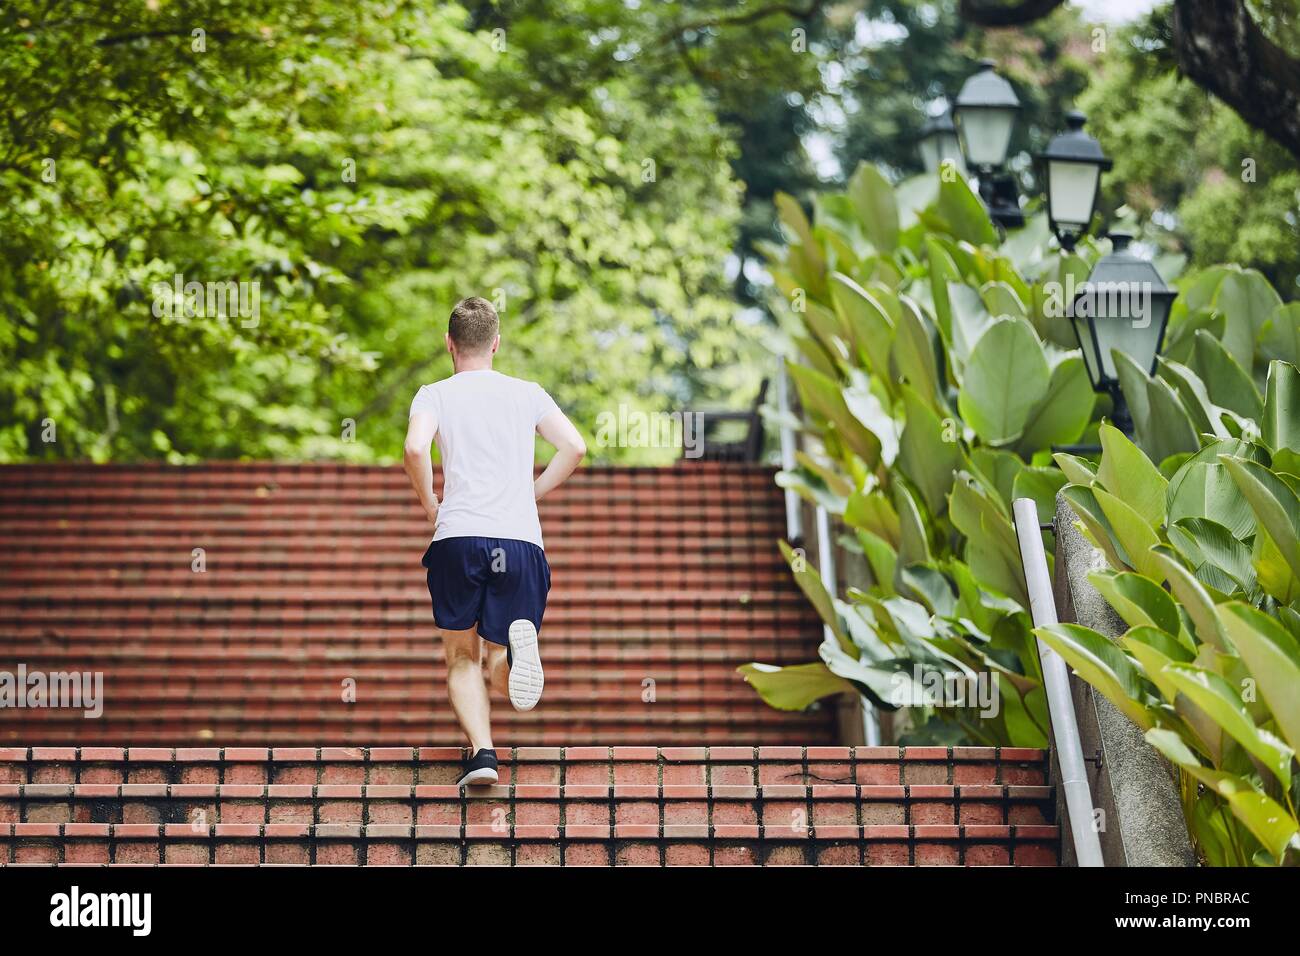 Sport in the city. Young man running up outdoor staircase in public park. Stock Photo